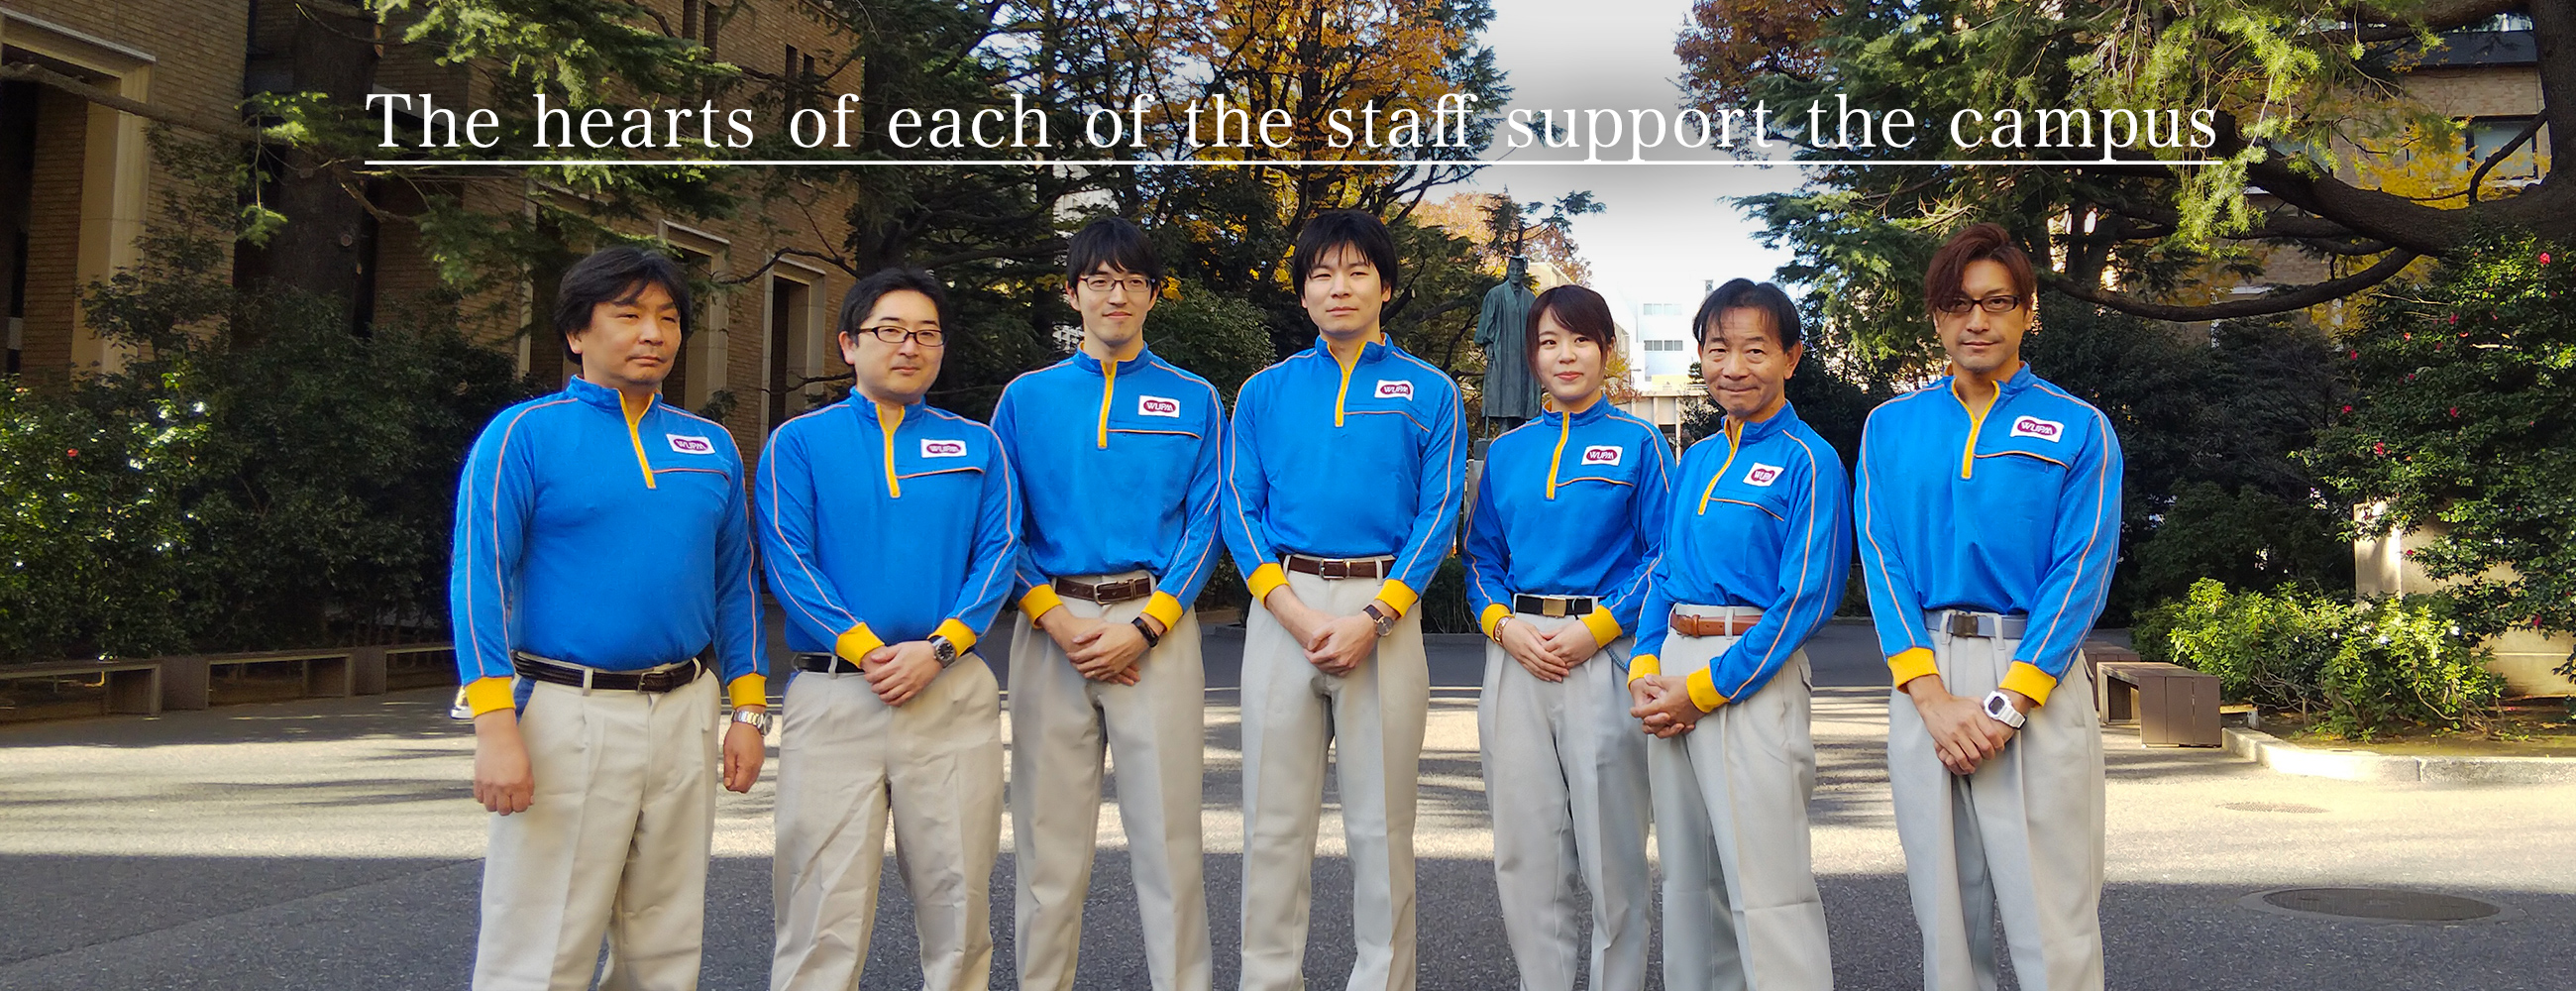 The hearts of each of the staff support the campus